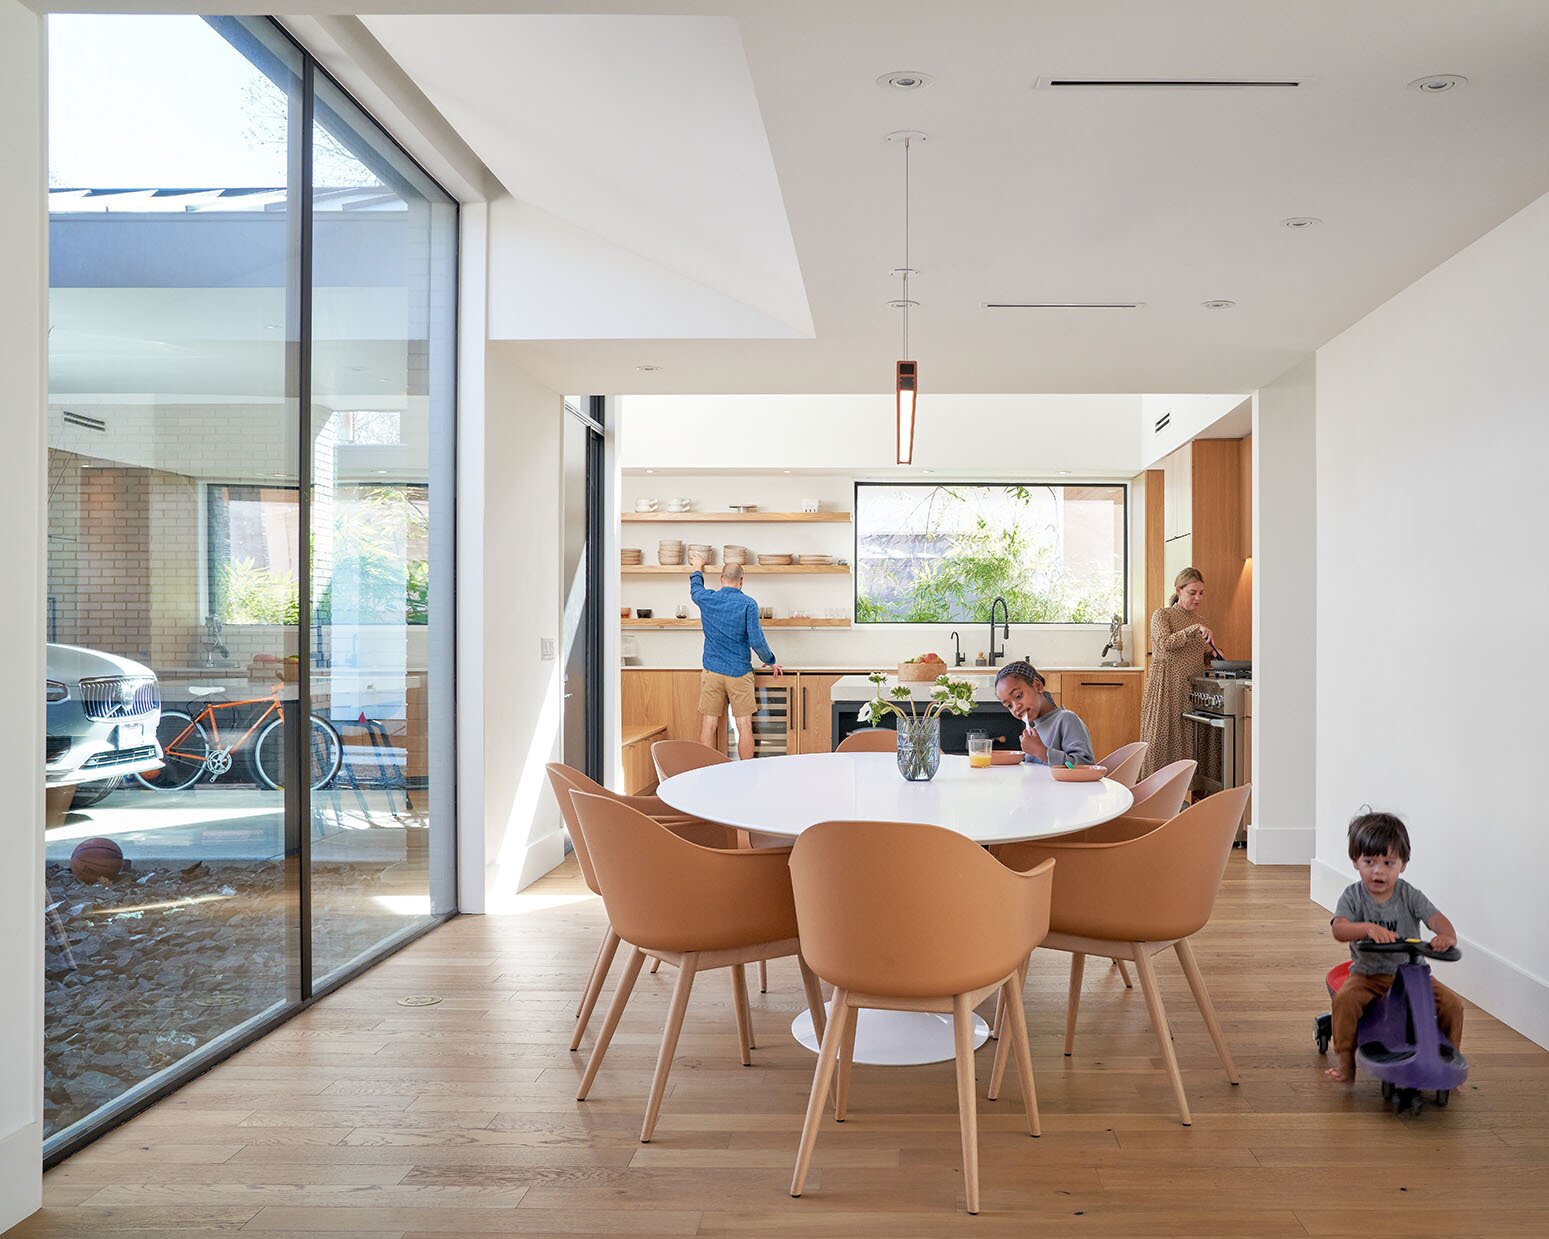 Dwell Magazine Features Austin Home with Gopi Shah Ceramics